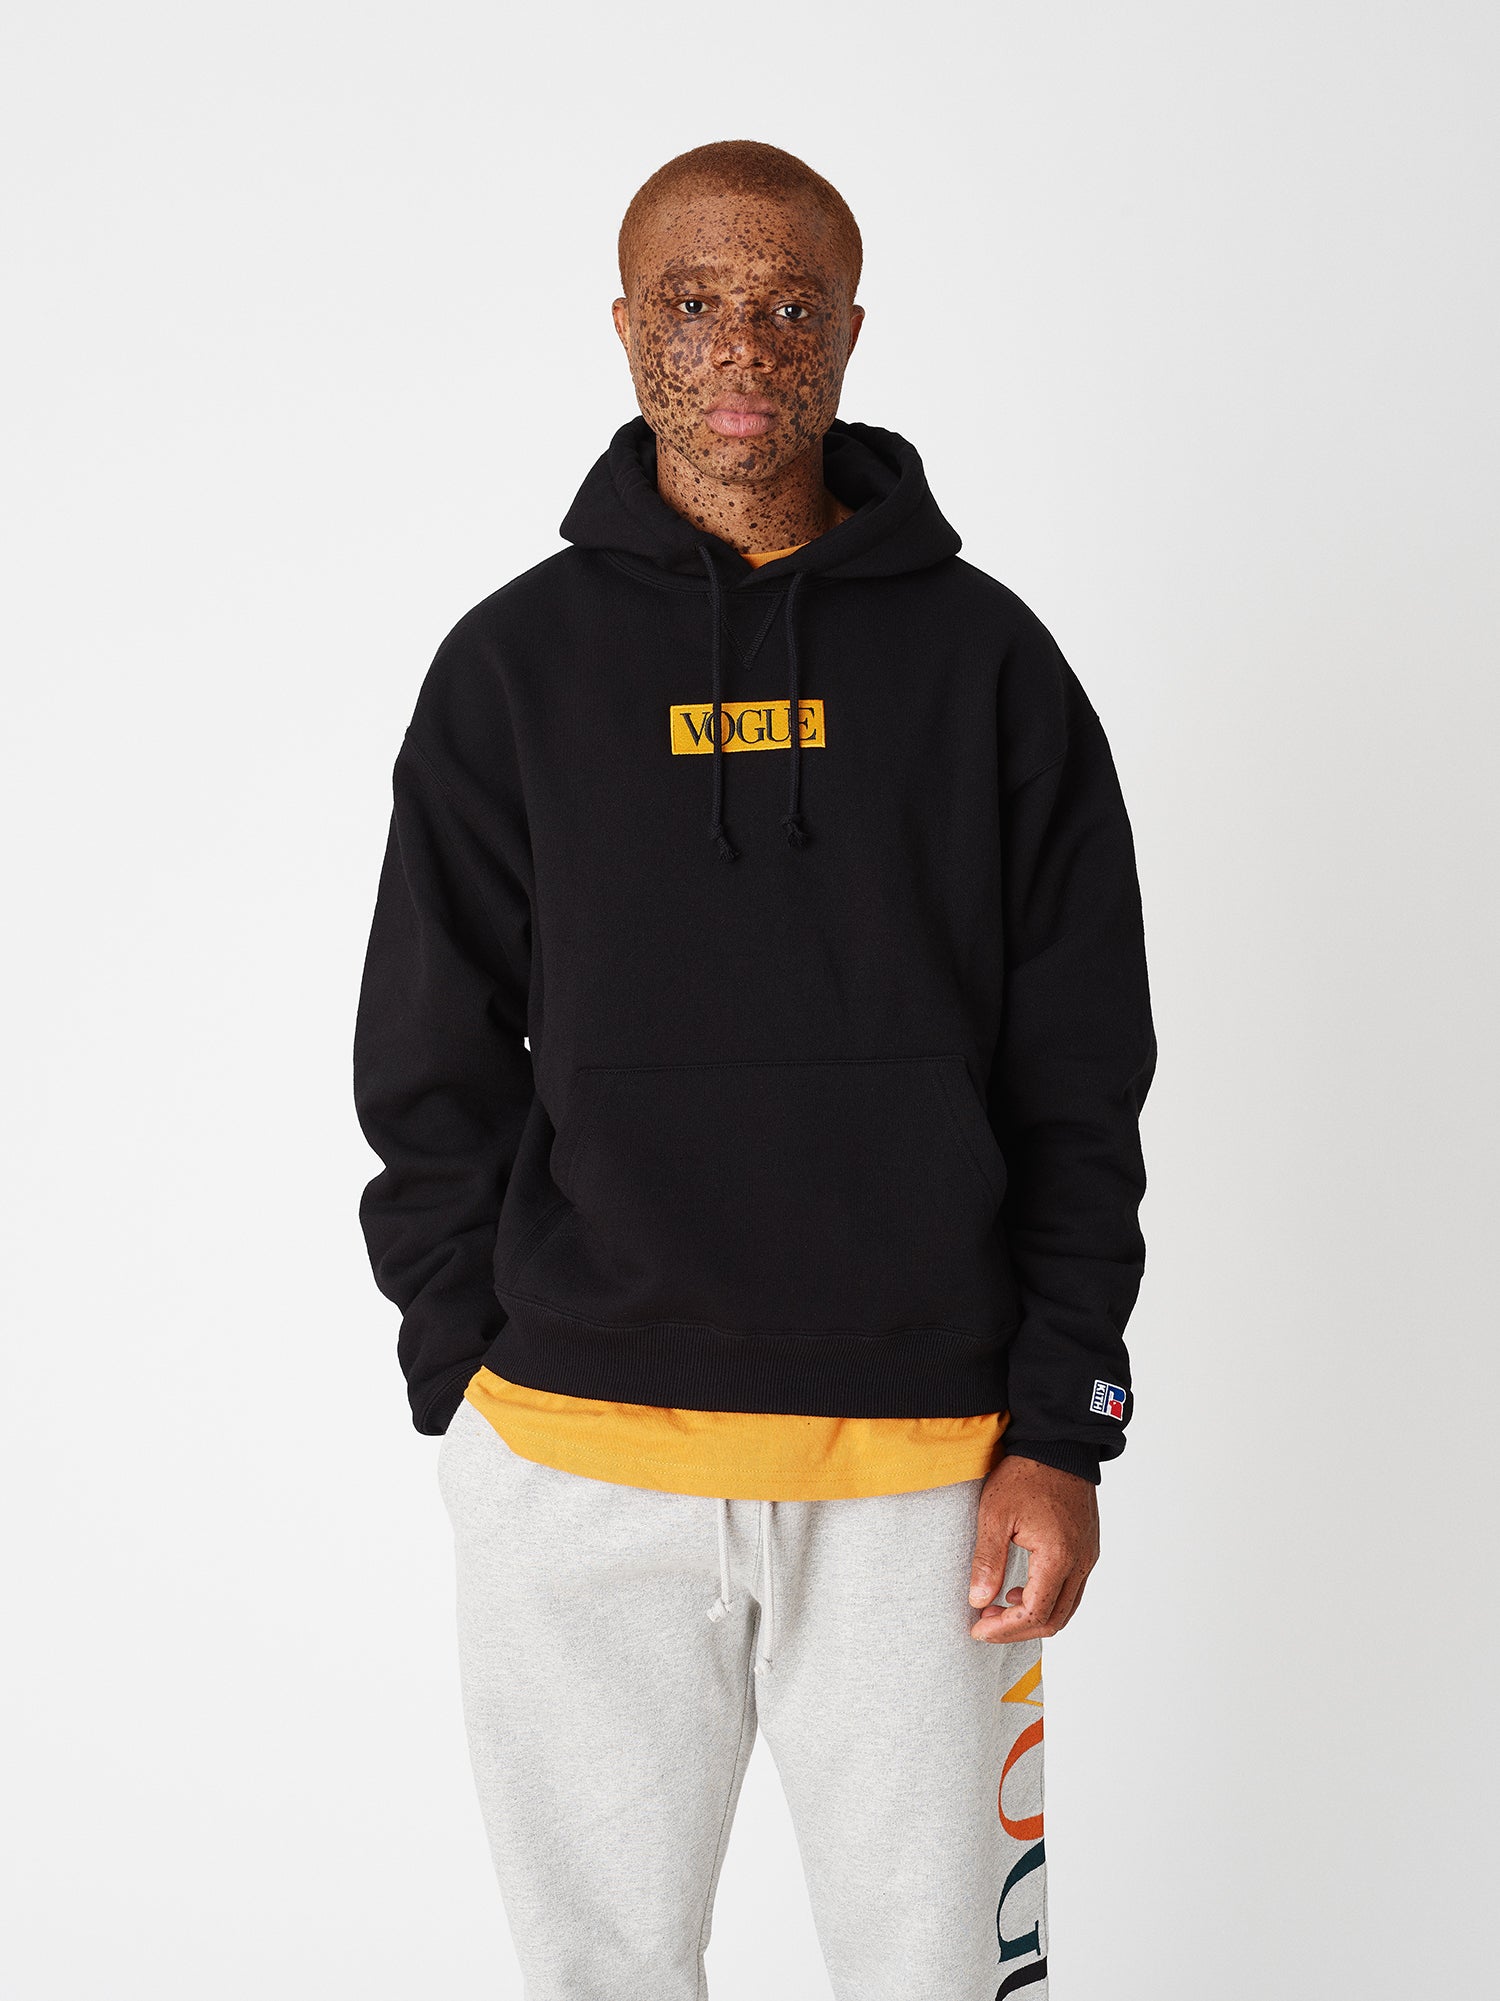 Kith x Russell Athletic x Vogue Lookbook